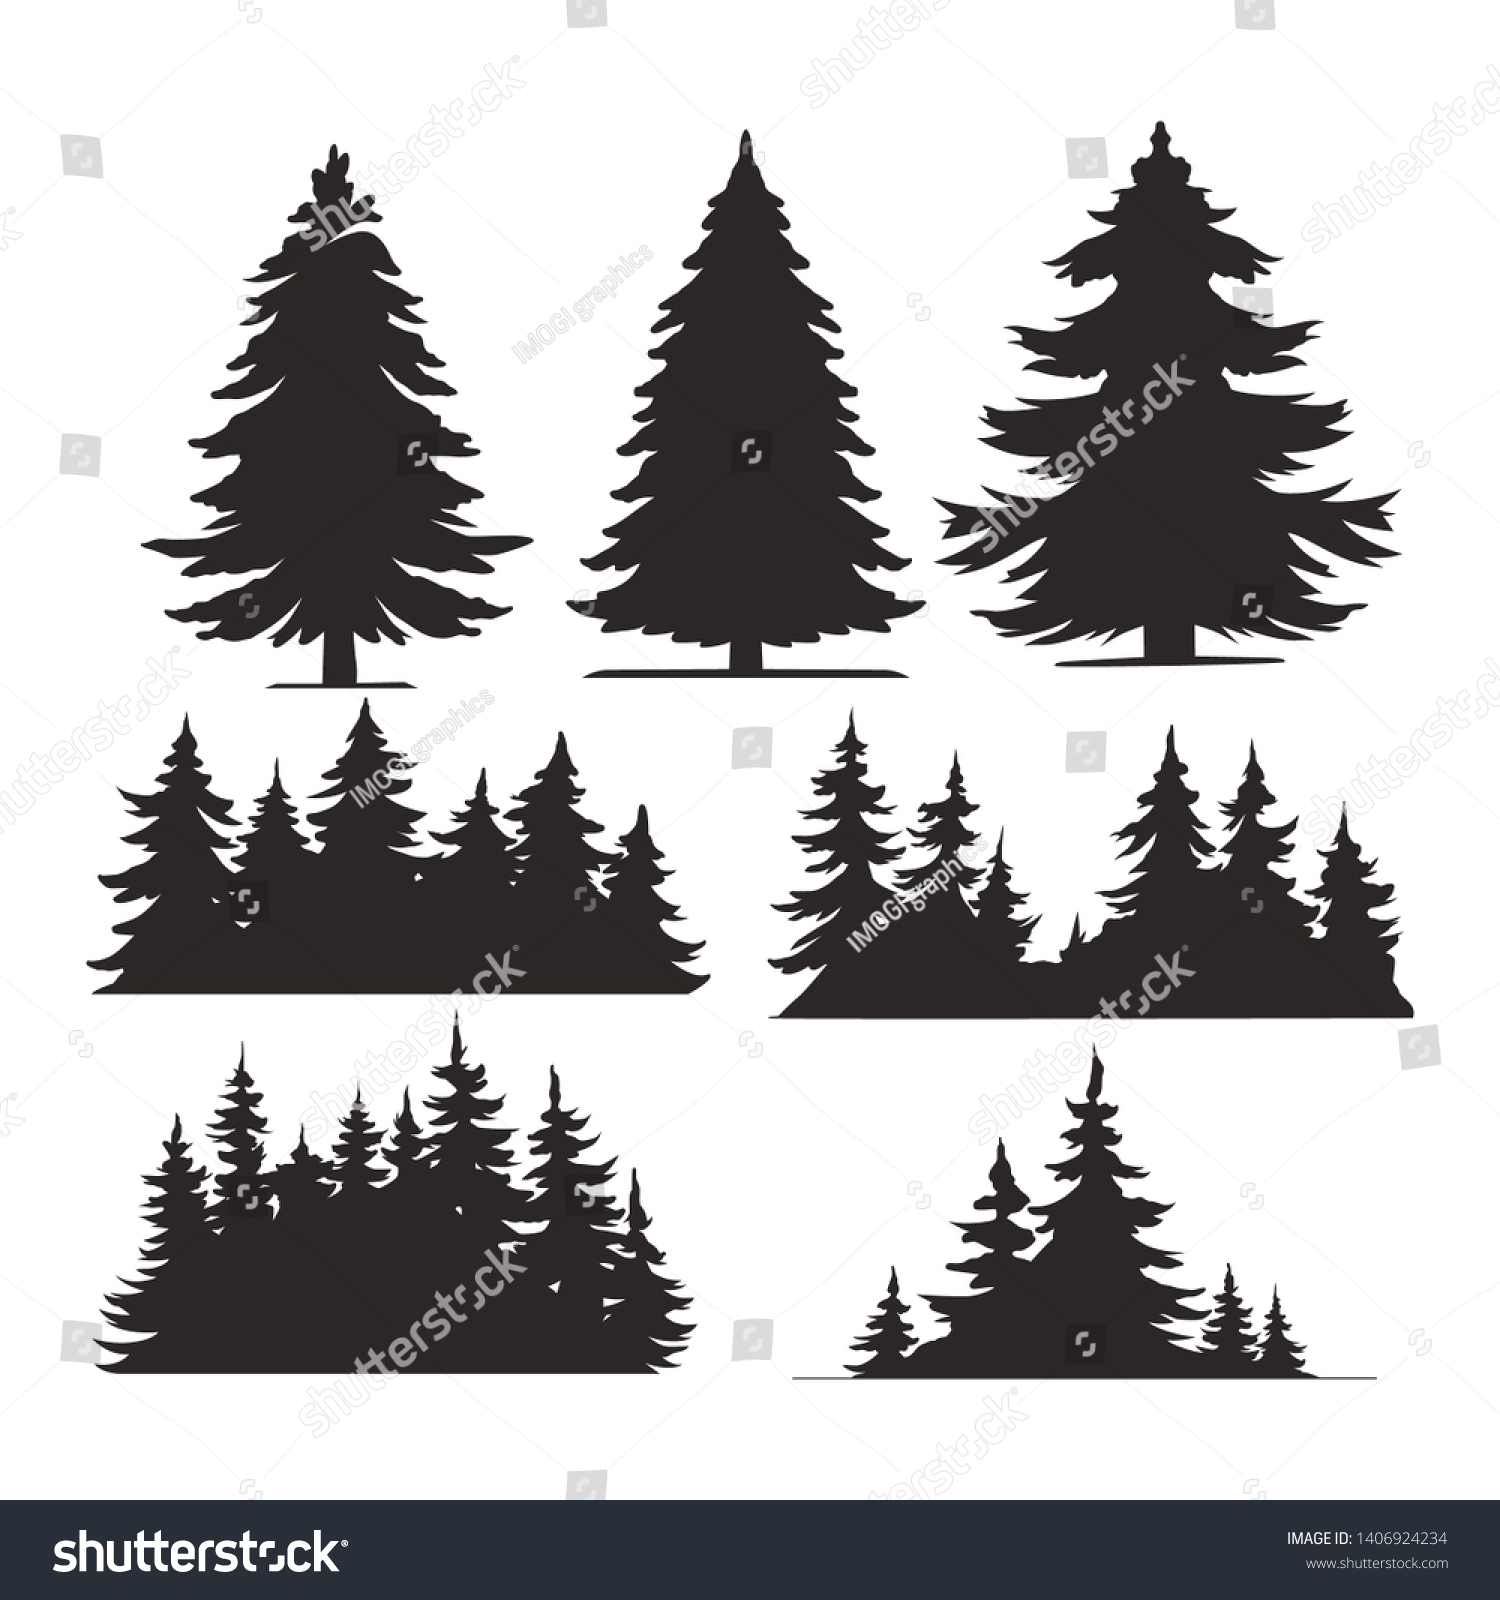 Vintage trees and forest silhouettes set in monochrome style isolated vector illustration #1406924234